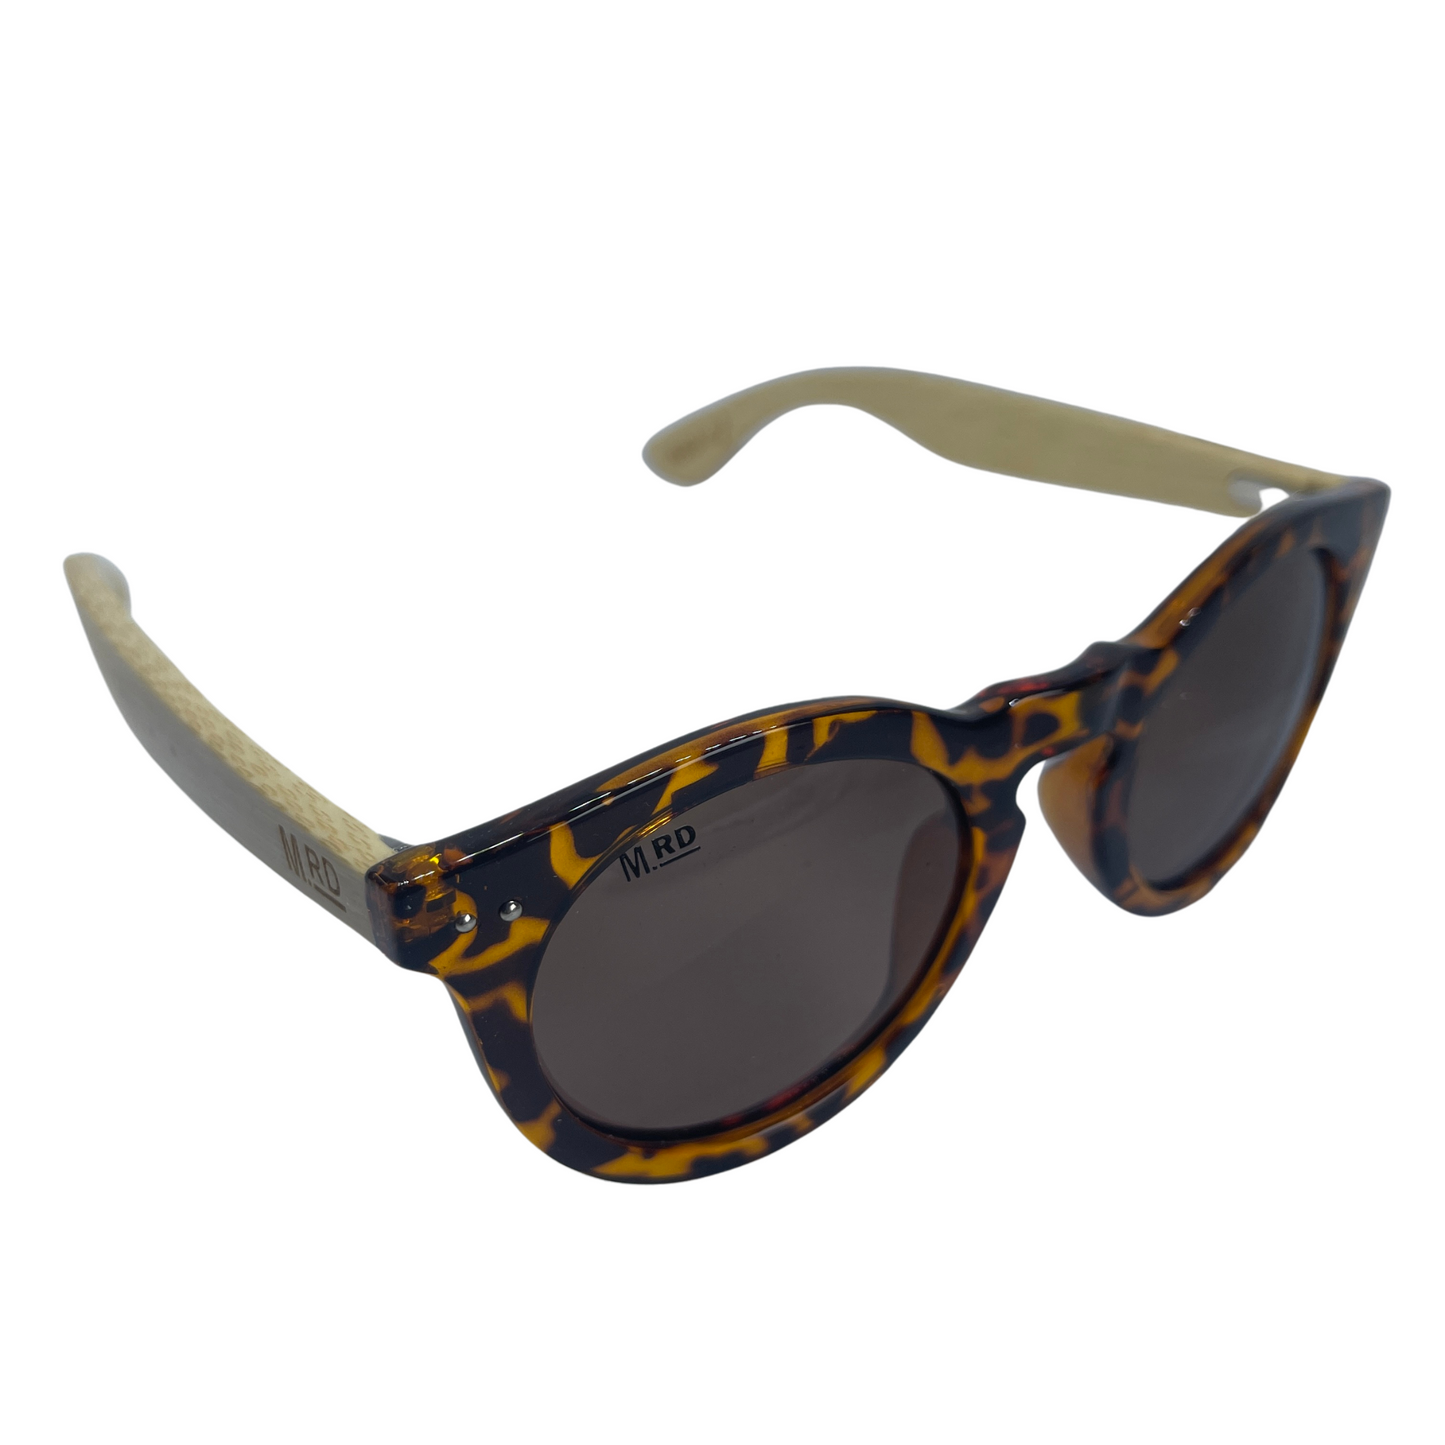 Womens sunglasses with brown tortoiseshell frames and bamboo arms in a Grace Kelly style